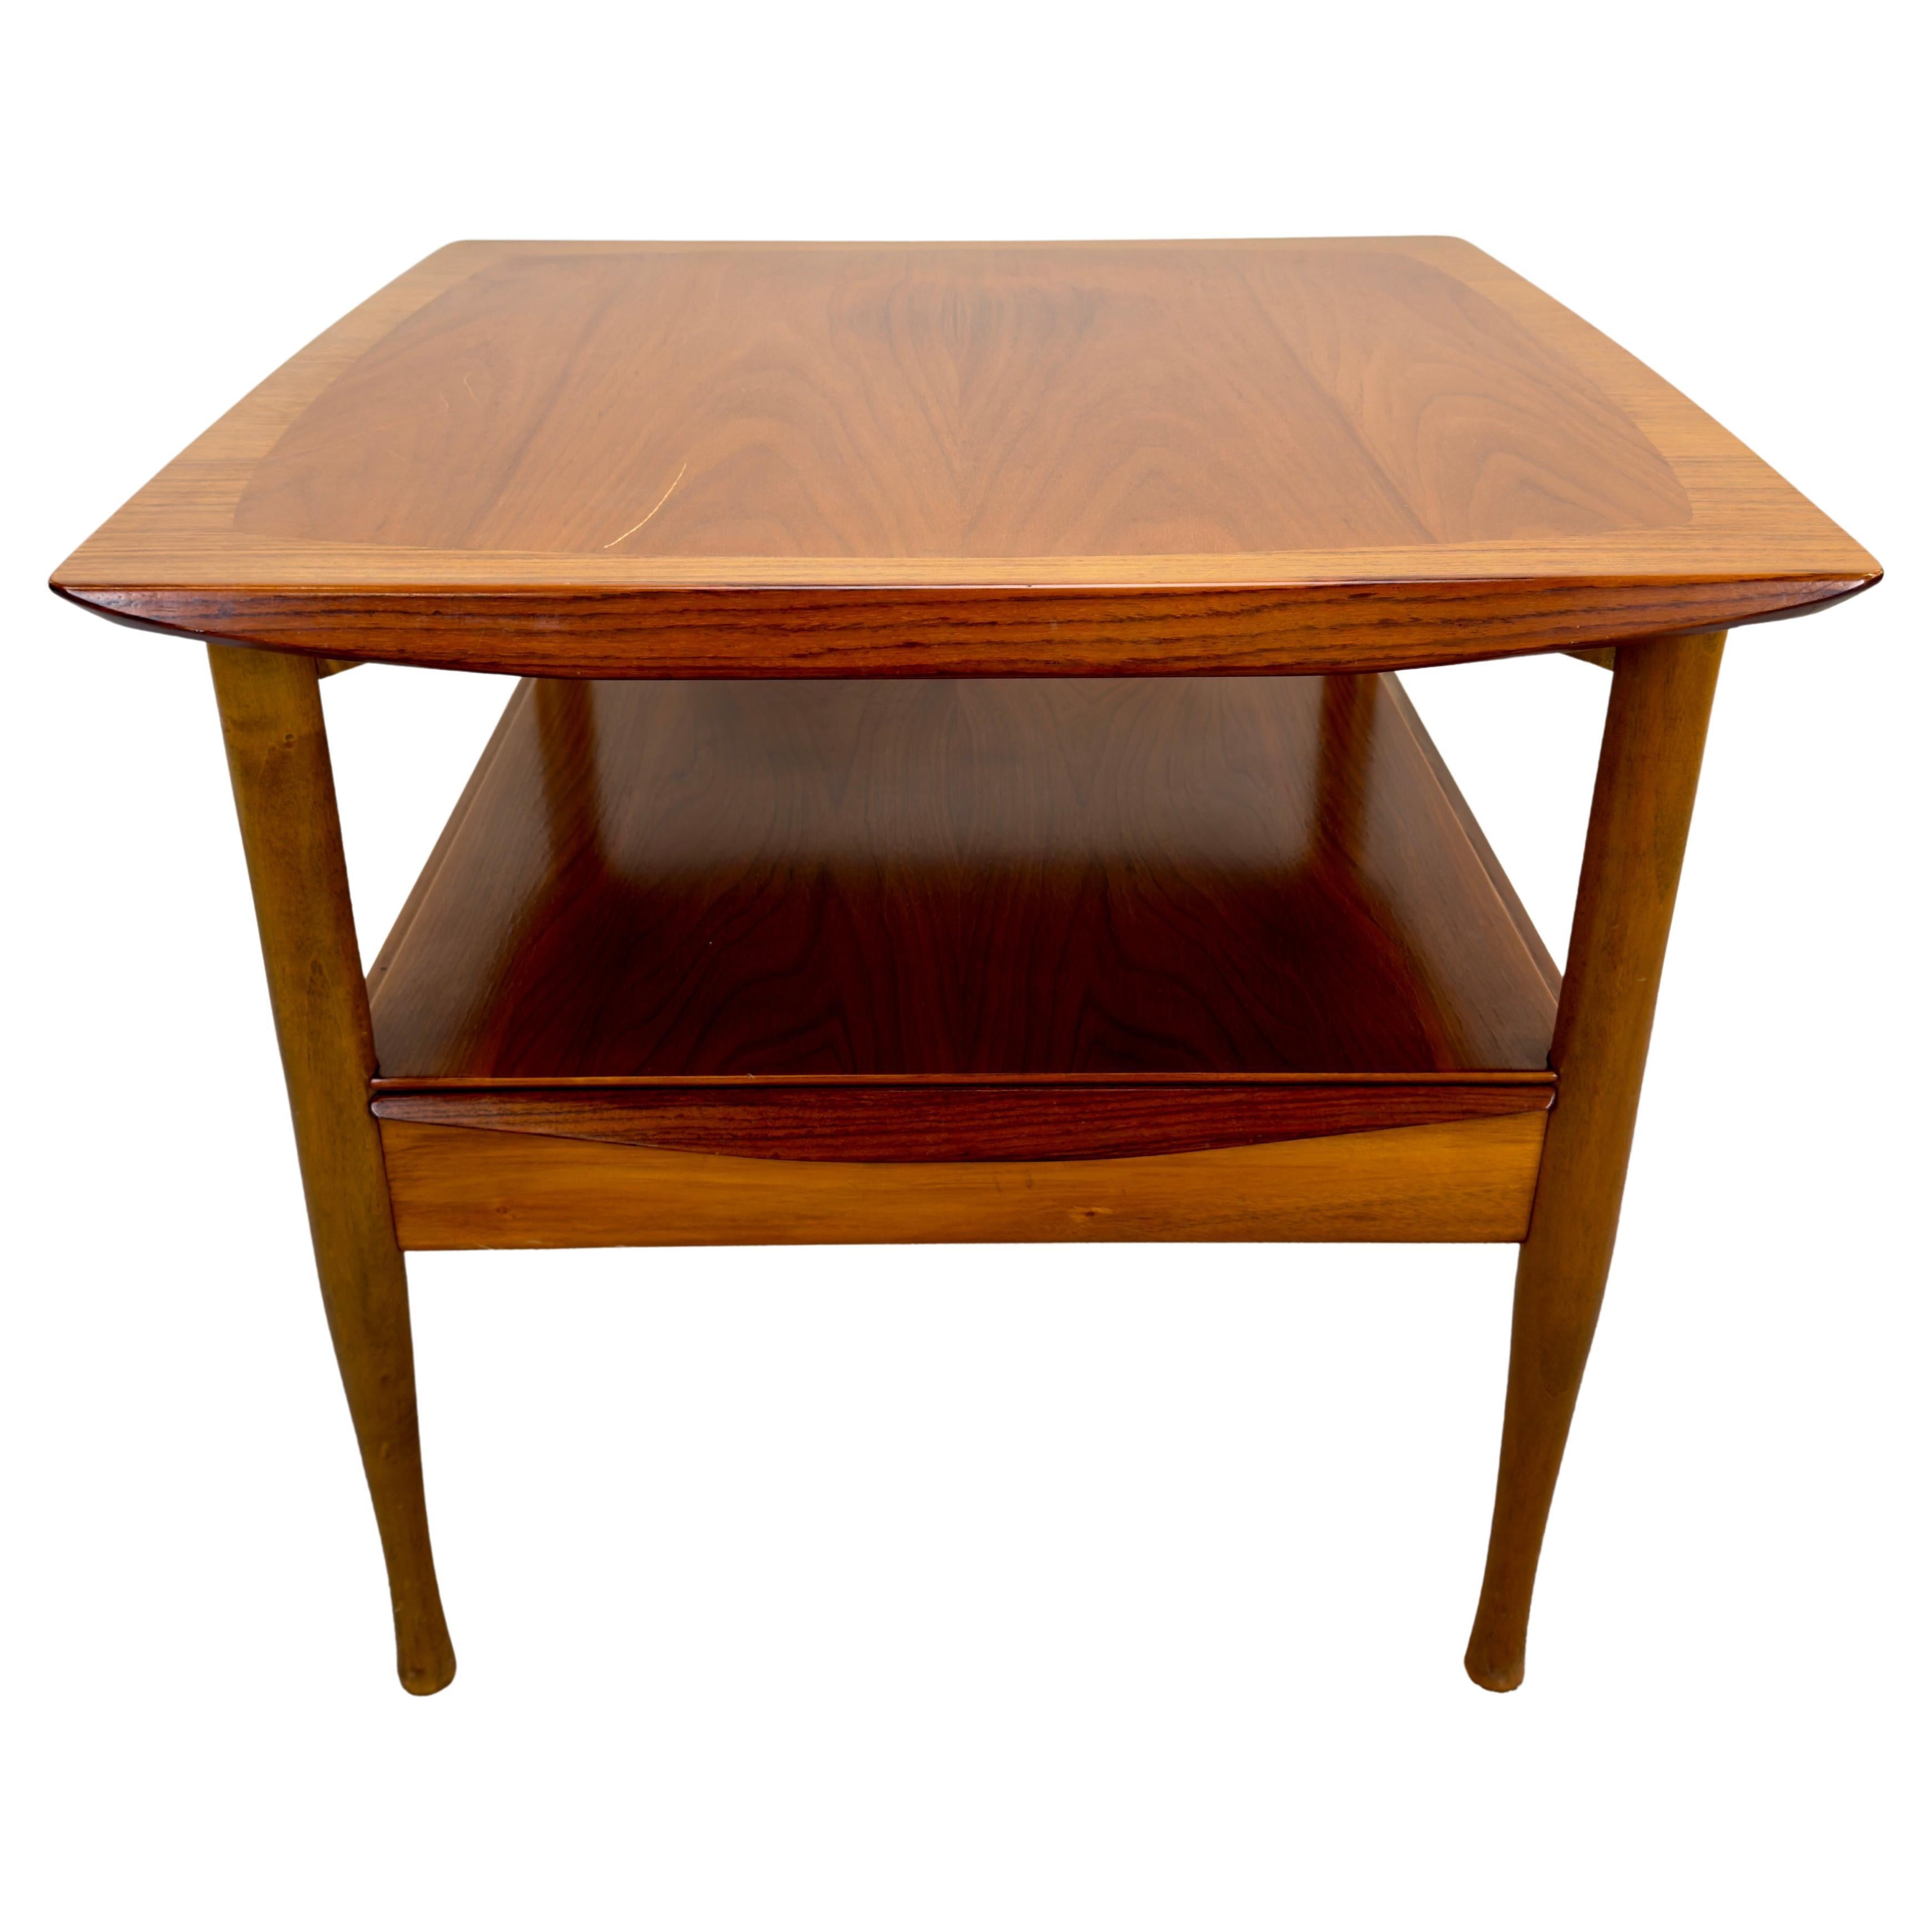 A timeless  Mid Century Modern design solid teak side or end table, crafted in the manner of the iconic Finn Juhl, seamlessly blends functionality with aesthetic grace. The distinctive features include a floating top and a thoughtfully incorporated